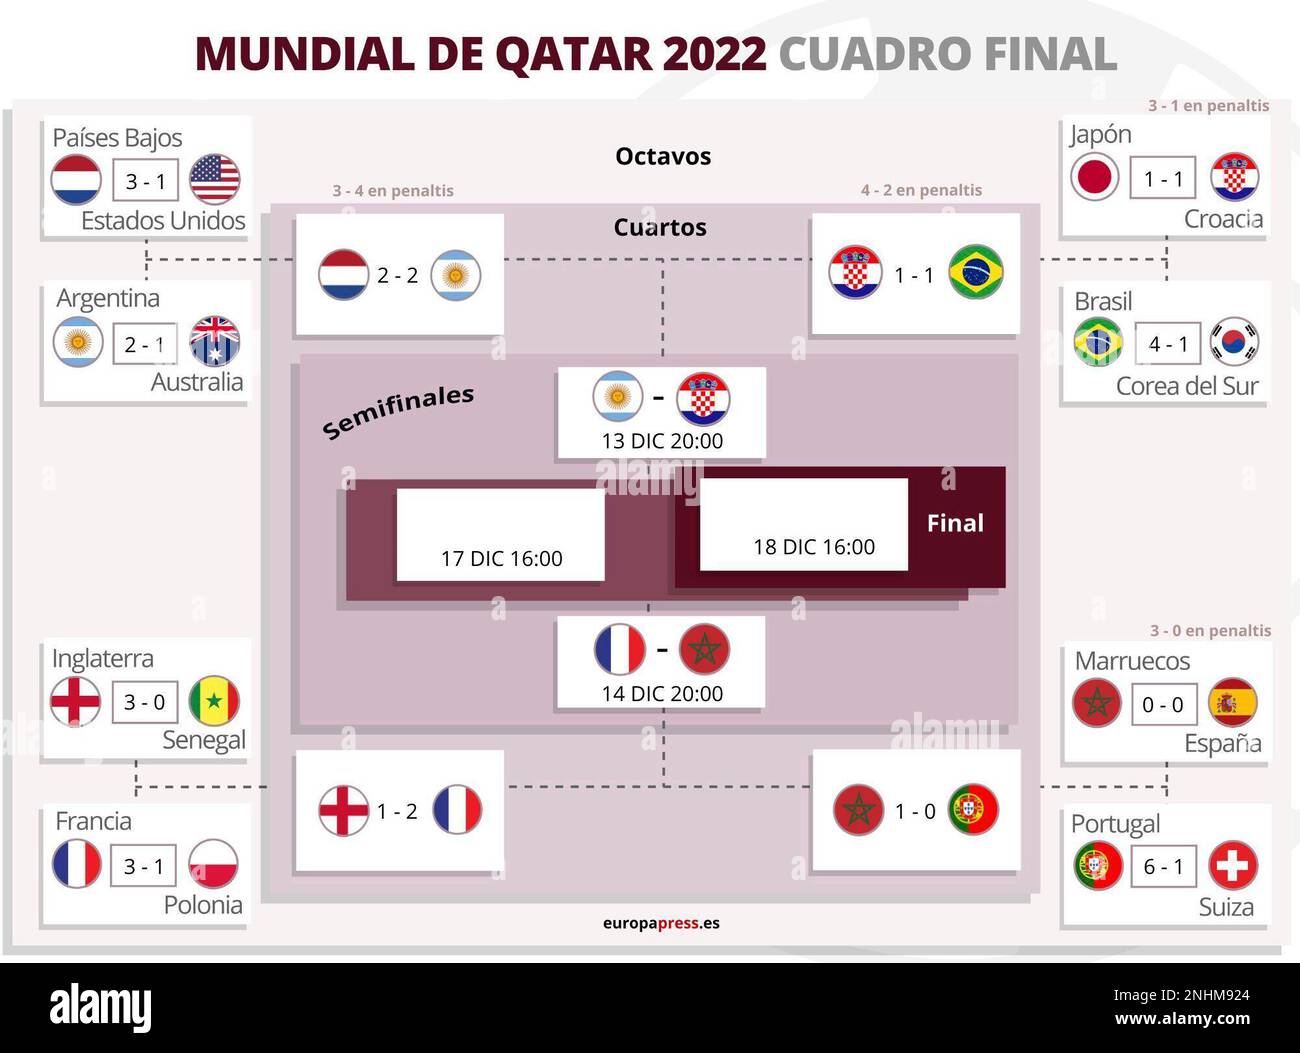 Chart showing the table for the final and the results of all matches played in the quarter-final stage of the FIFA World Cup in Qatar between 9 and 10 December 2022